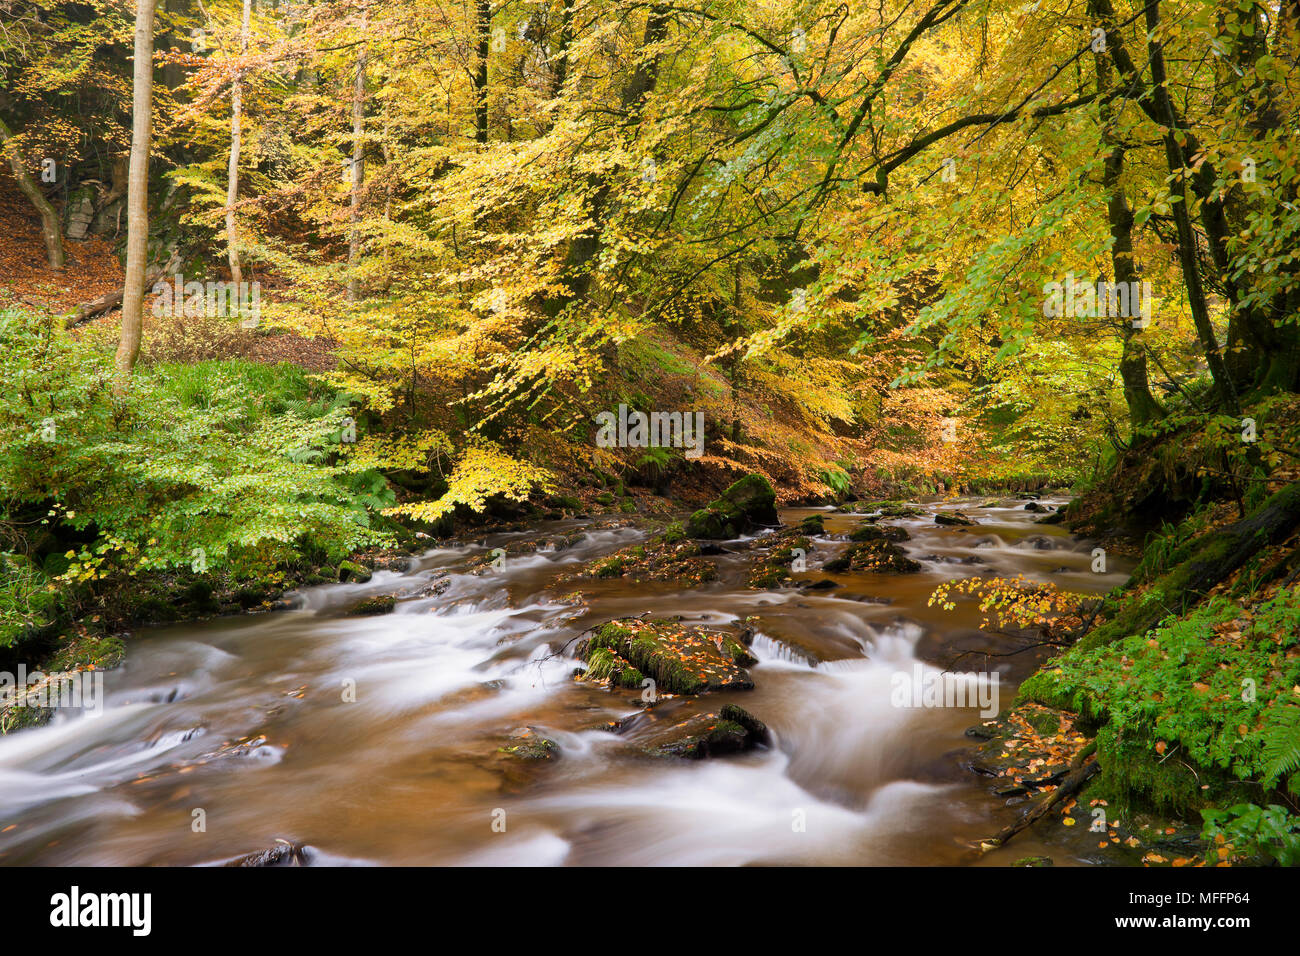 Autumn leaves cover the trees along a stream in Scotland. Stock Photo